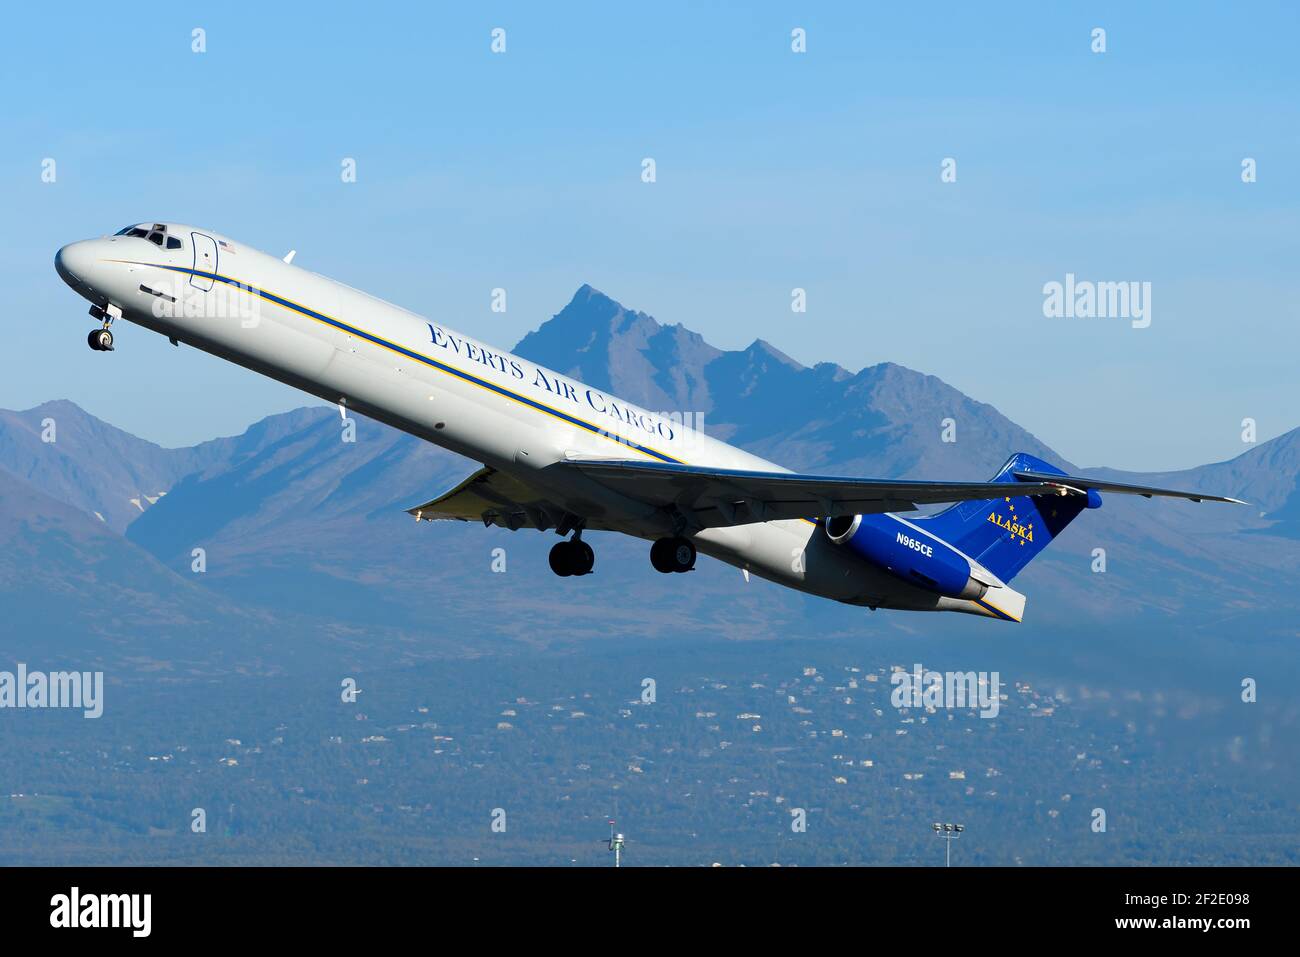 Everts Air Cargo aircraft McDonnell Douglas MD-83 N965CE take off from Anchorage Airport. Everts Air cargo in Alaska. Stock Photo